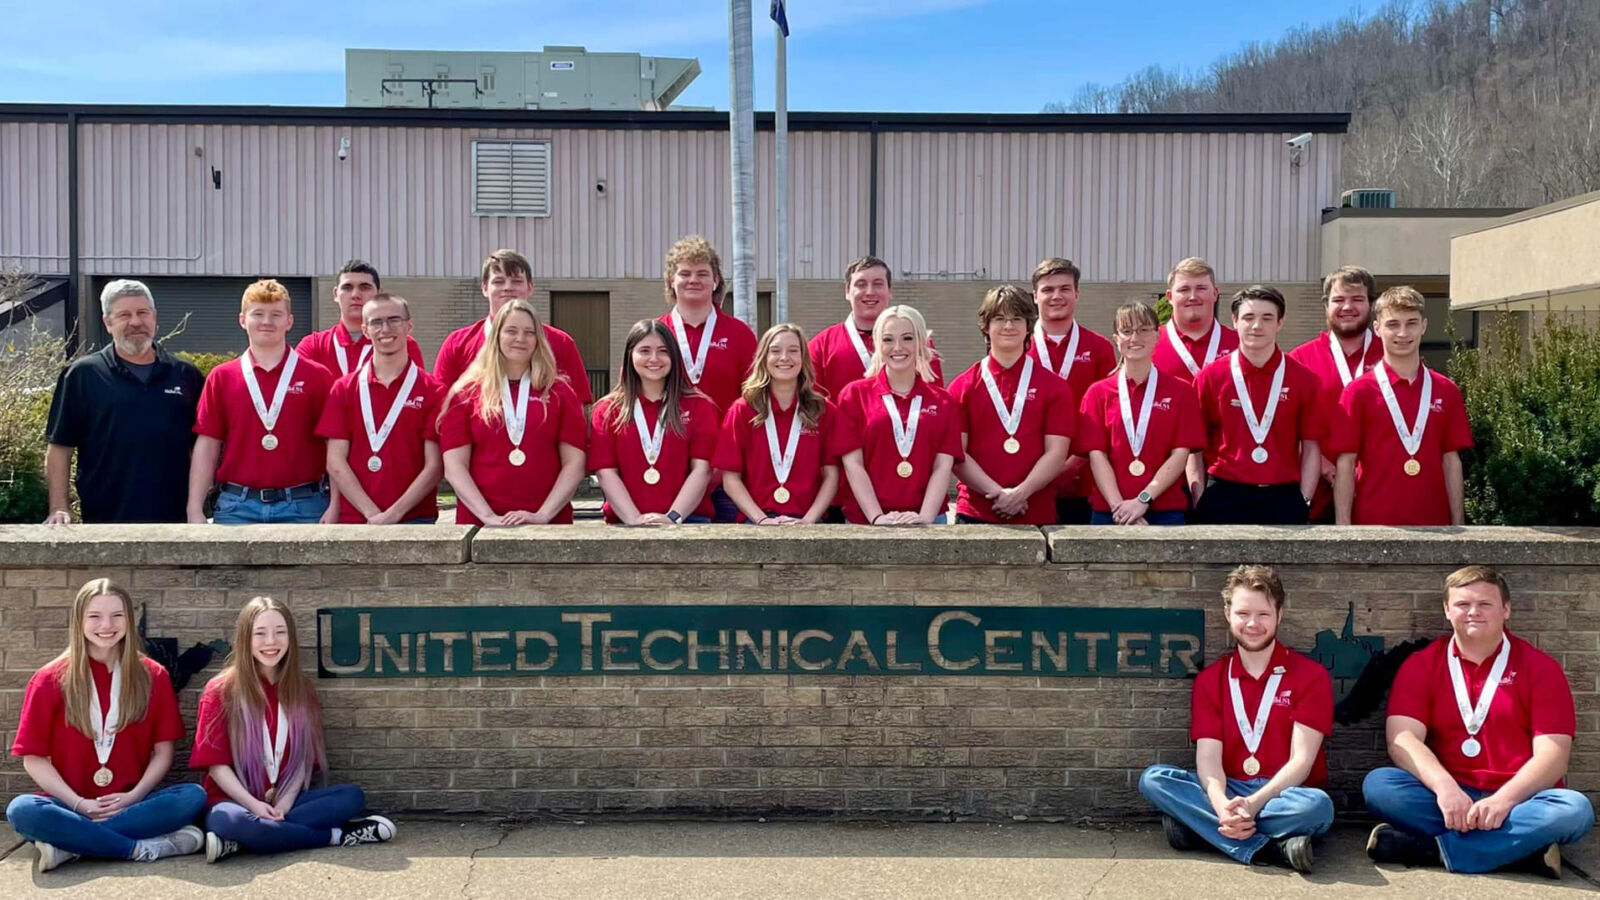 United Technical Center Student Group Photo, in front of UTC sign